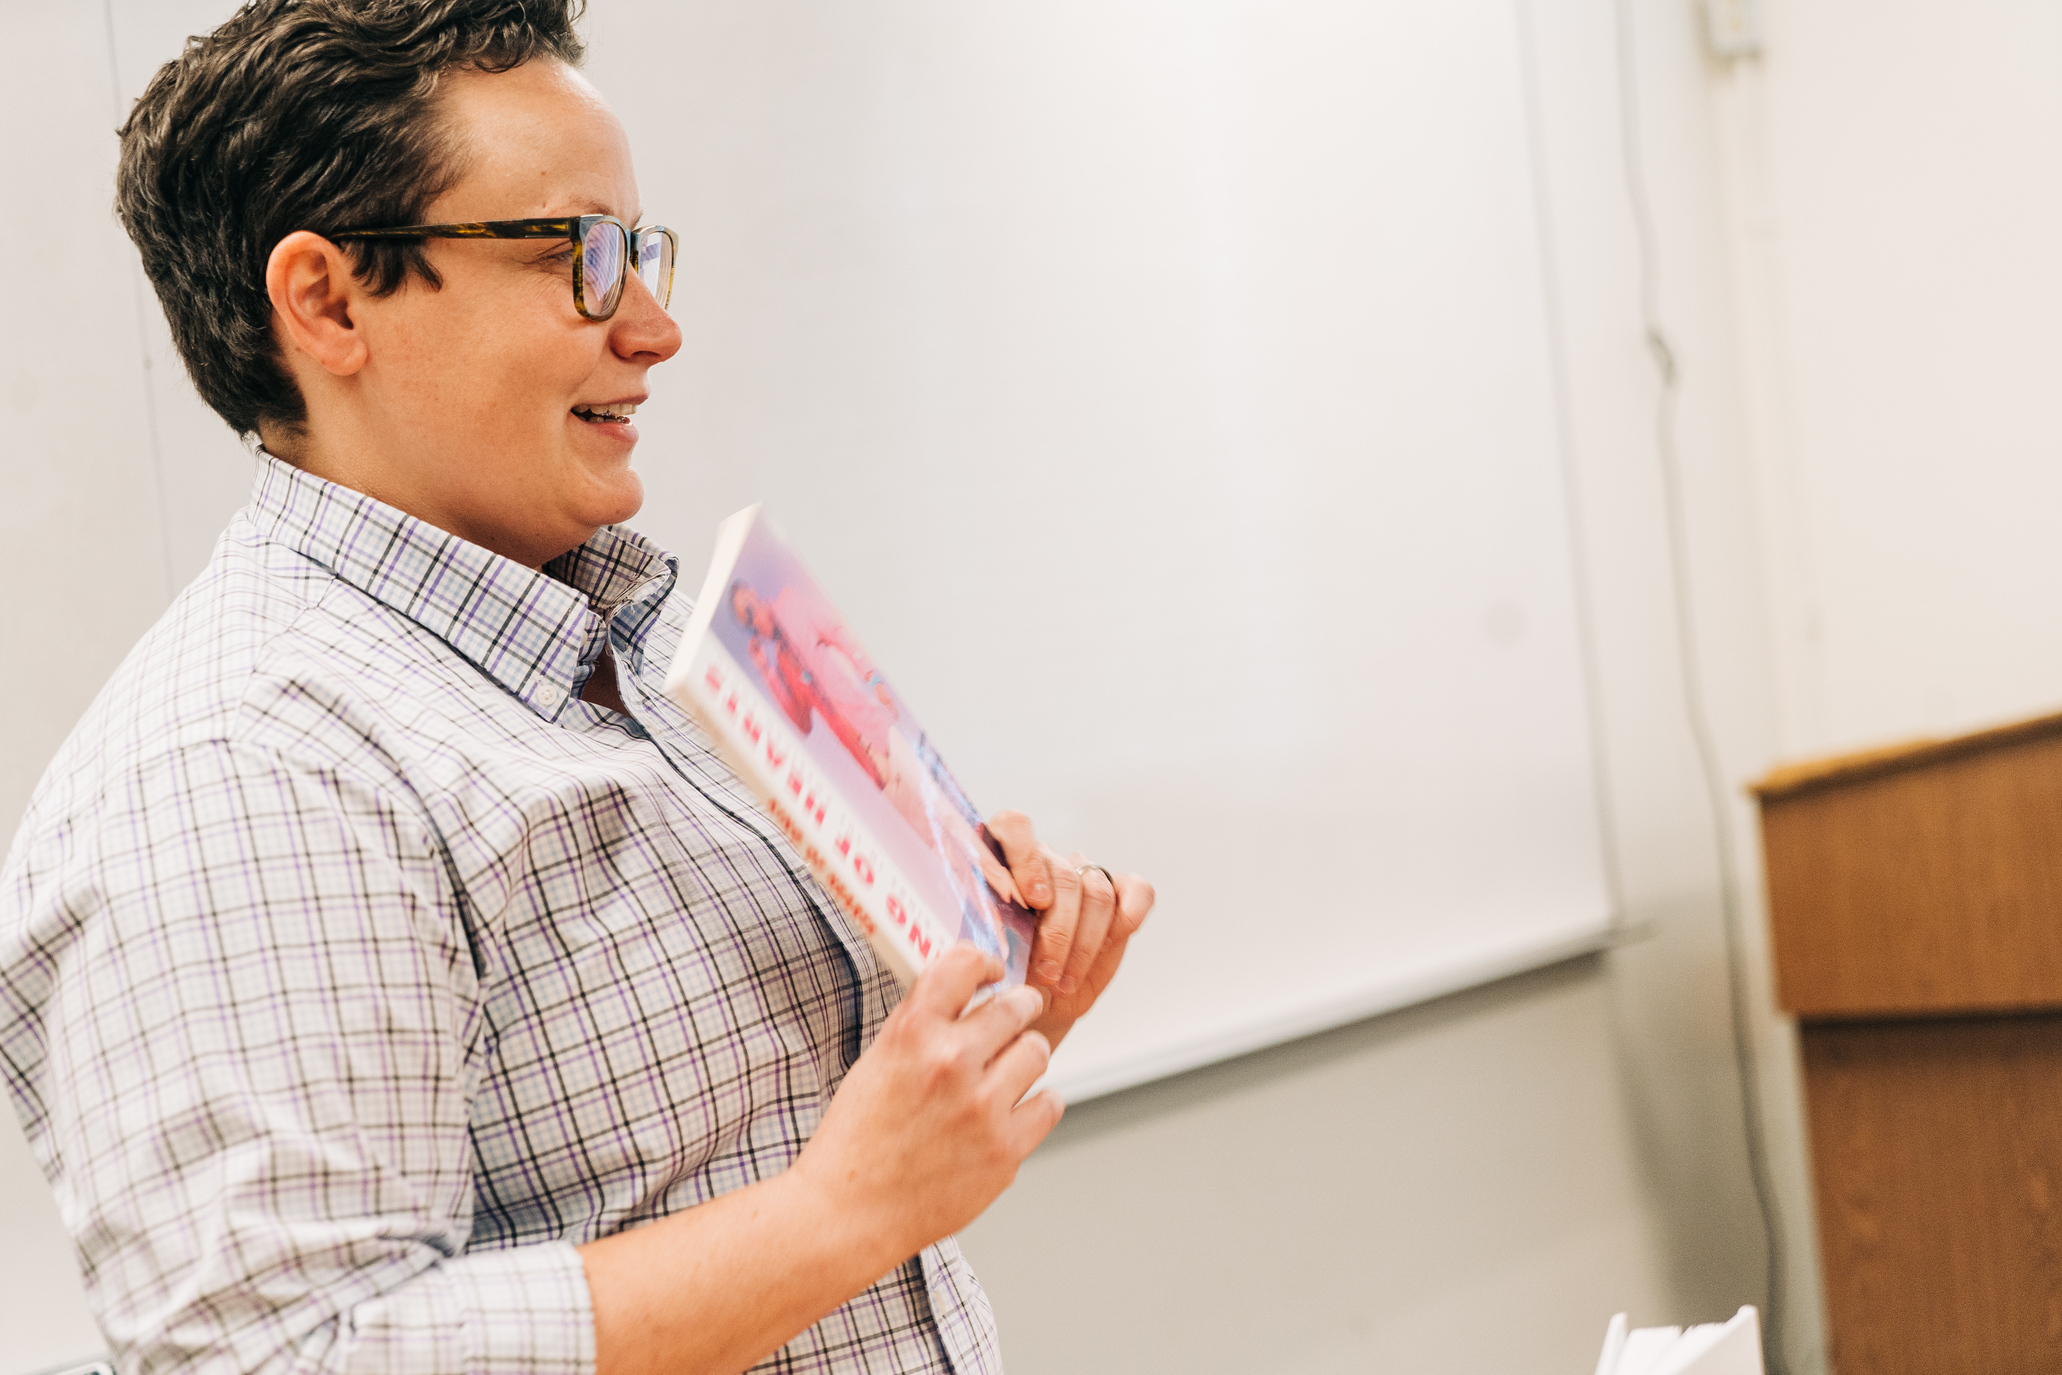 A professor holding a book showing it to the class.